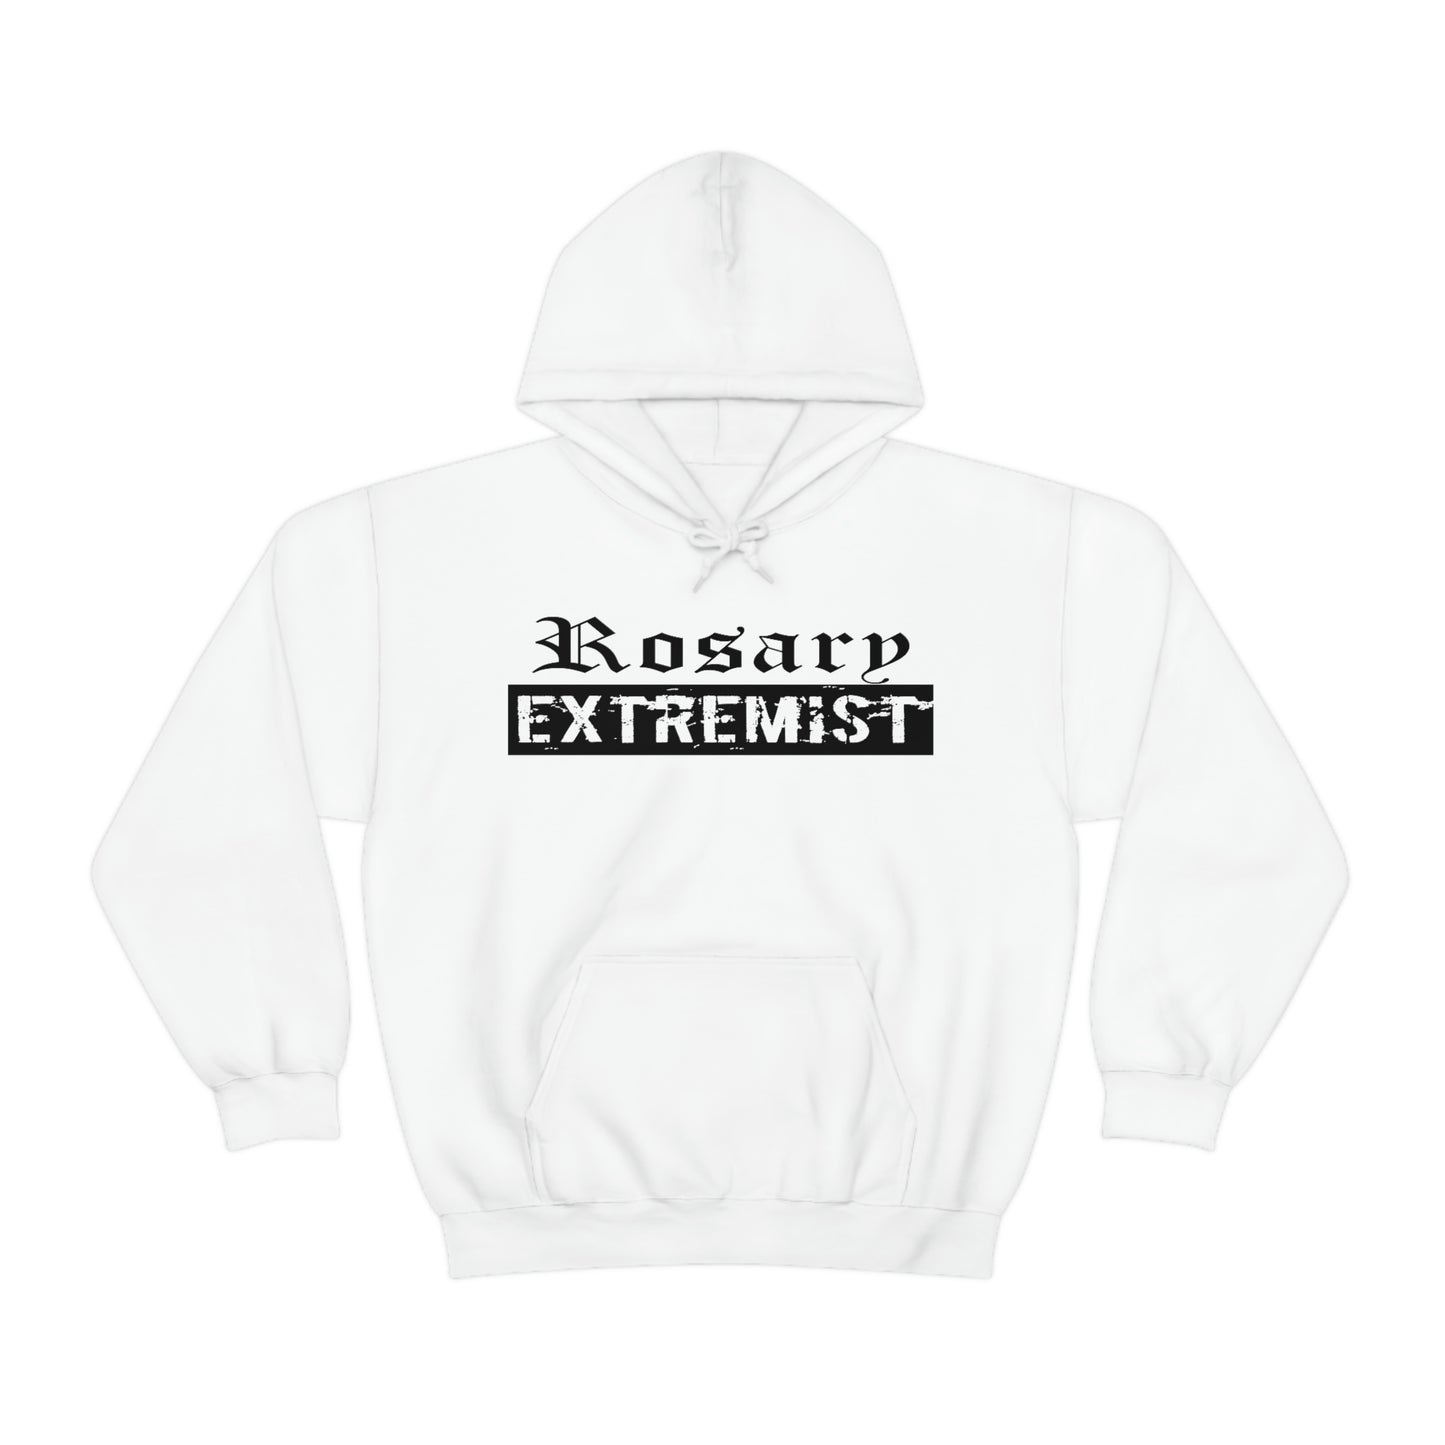 White Gildan Hoodie with black "Rosary Extremist" text printed on it by Sanctus Servo.